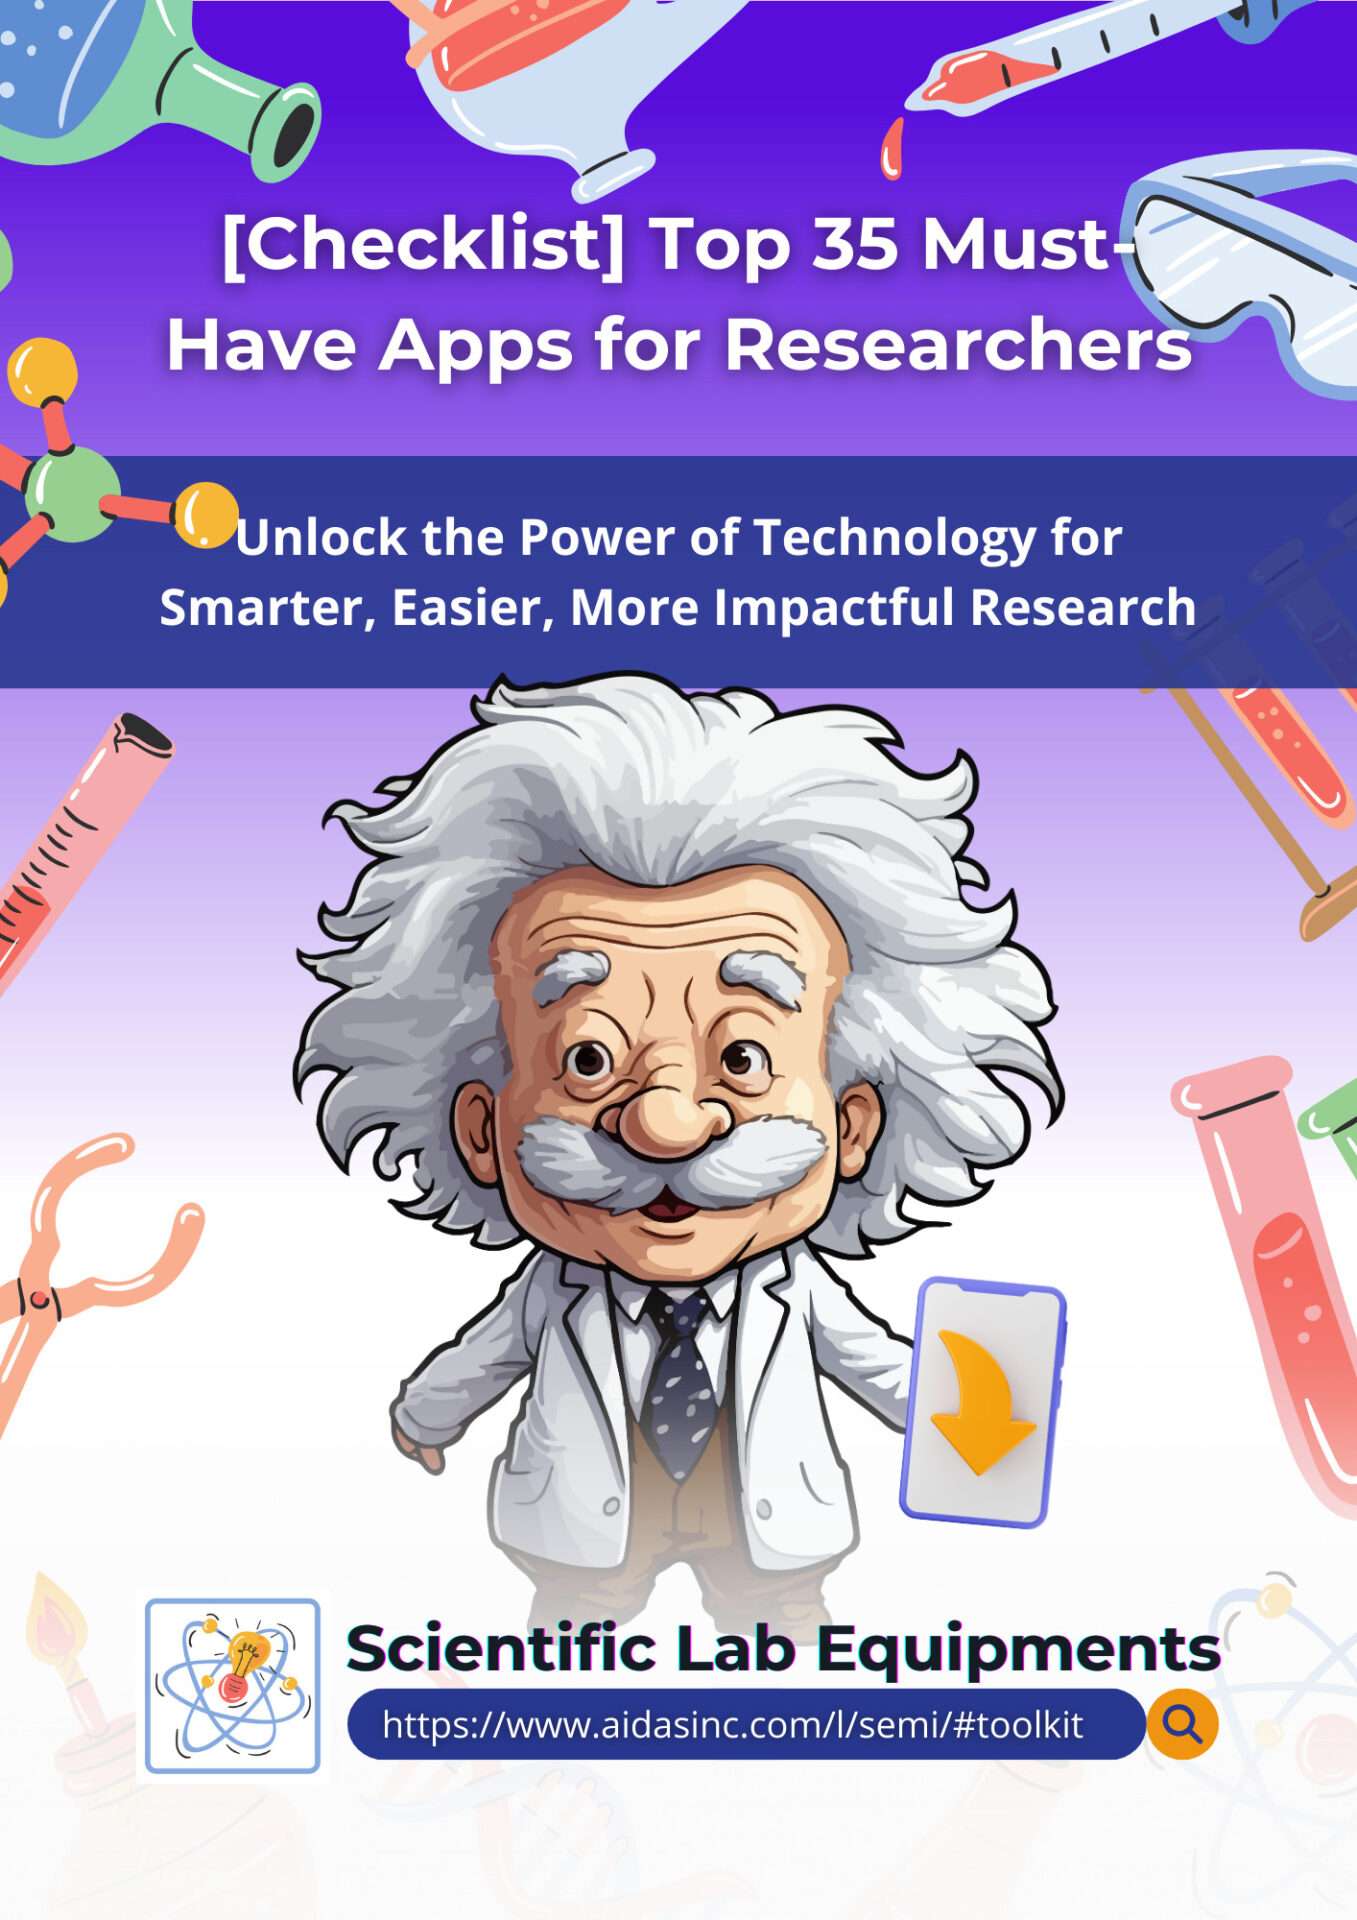 [Checklist] Top 35 Must-Have Apps for Researchers